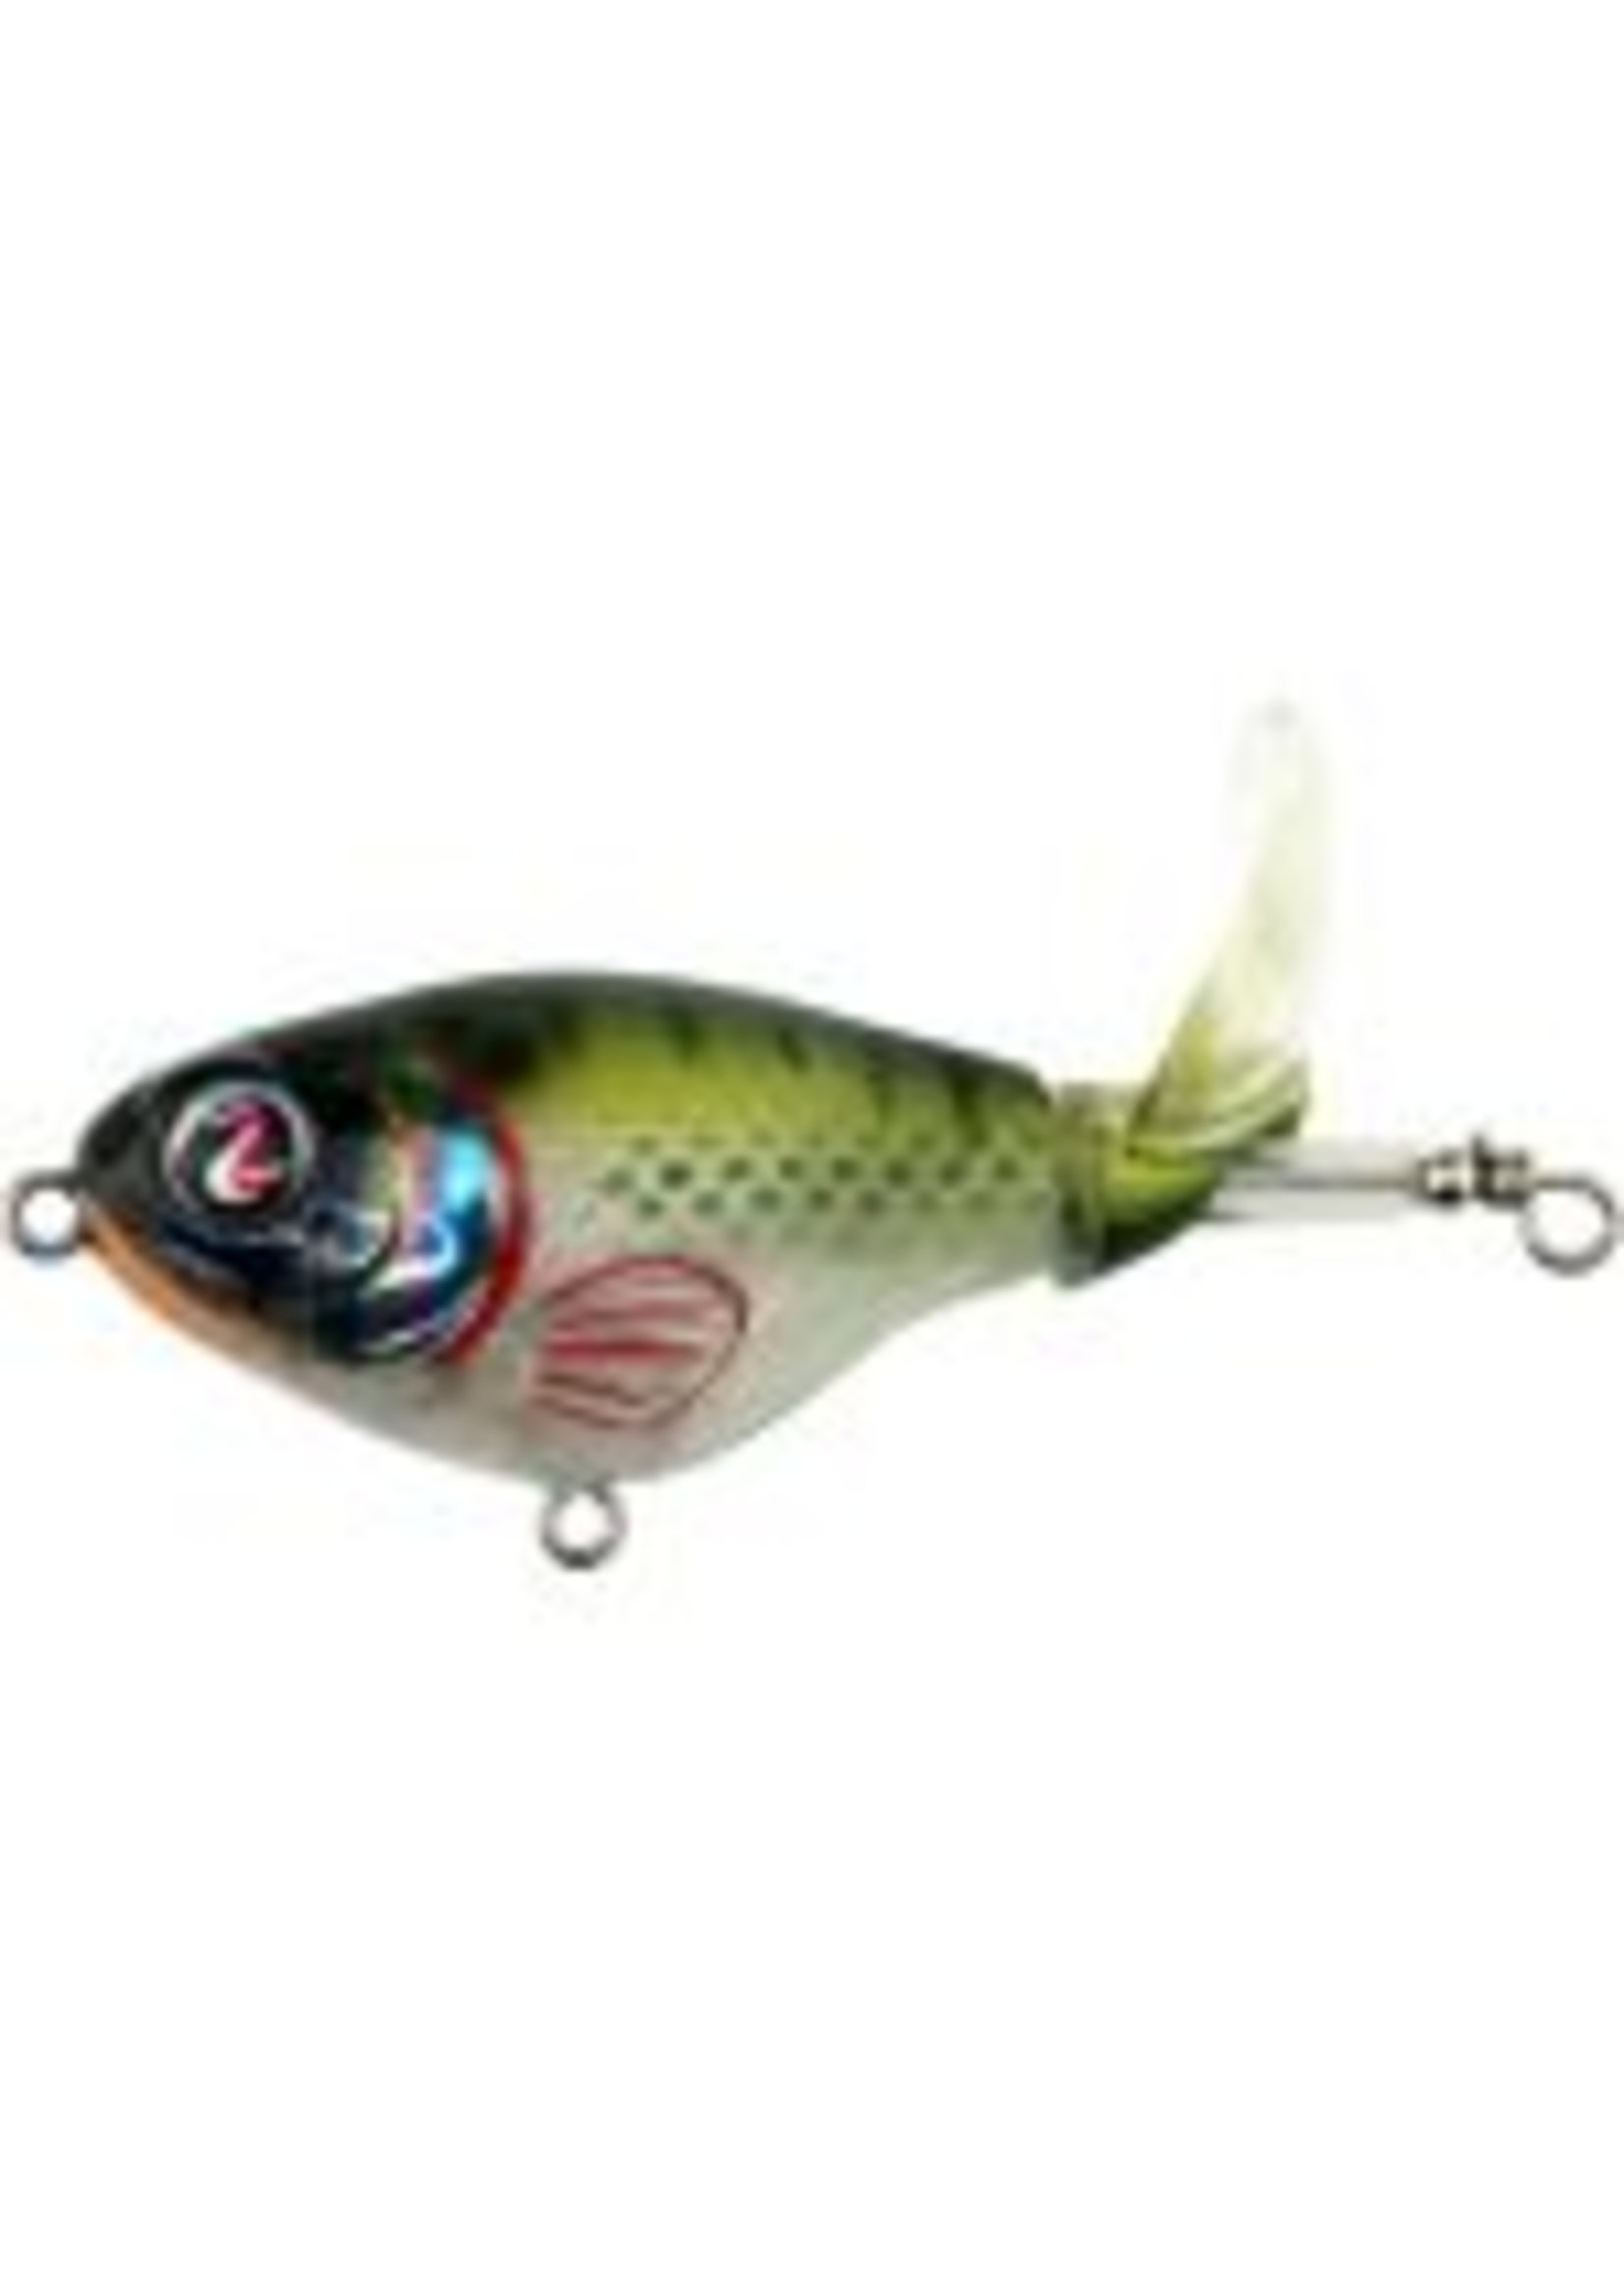 Whopper Plopper 75 mm style 17g Topwater Popper Fishing Lure - Frog color